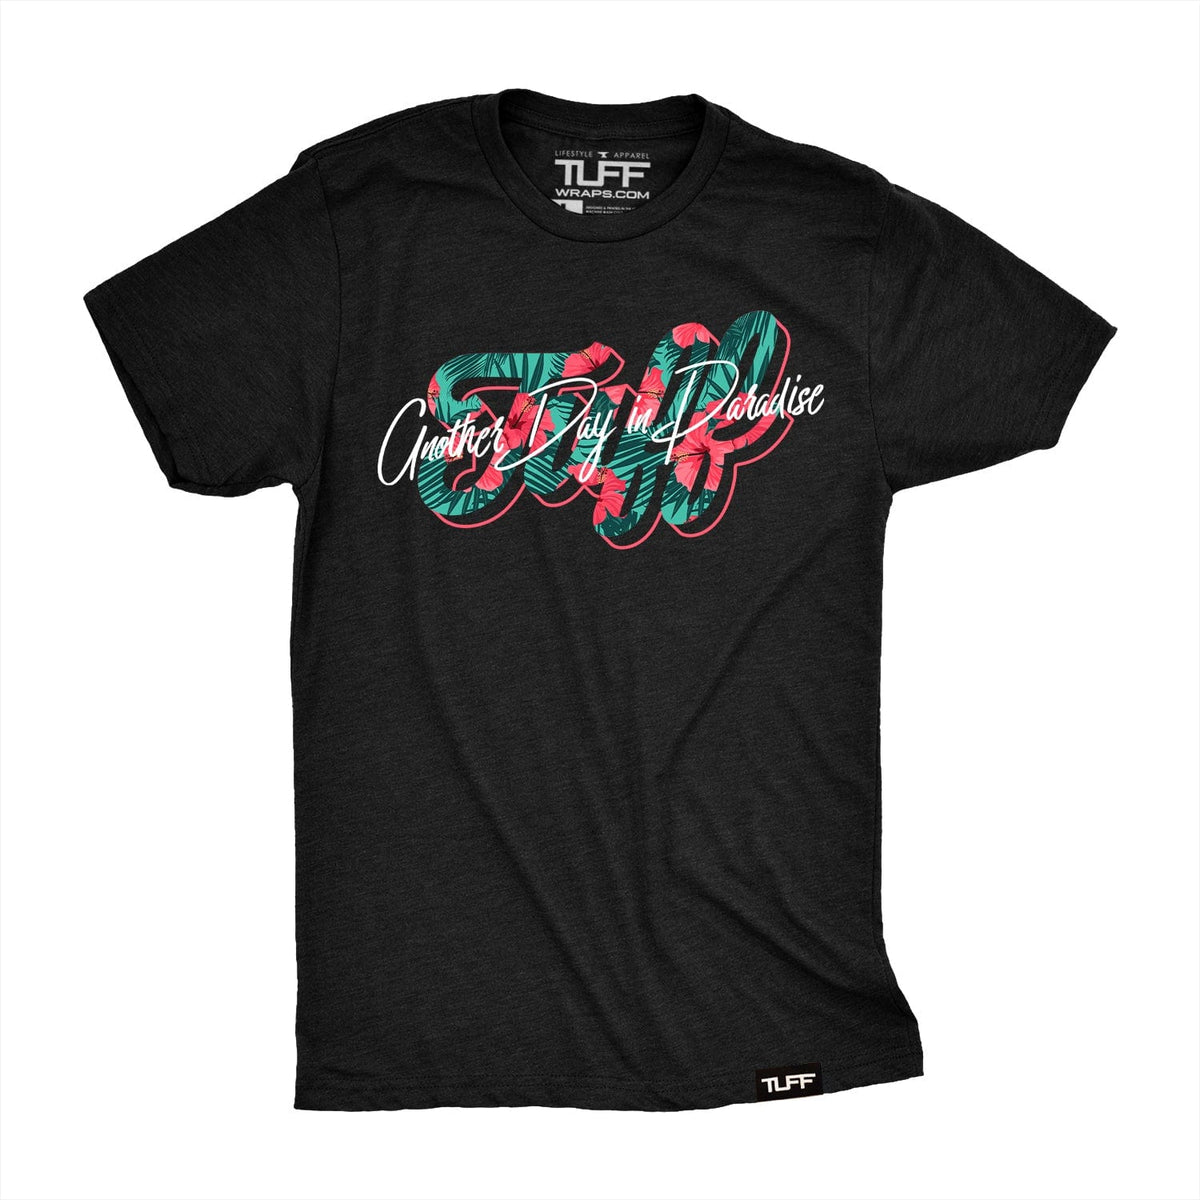 Another Day In Paradise Script Tee S / Black TuffWraps.com